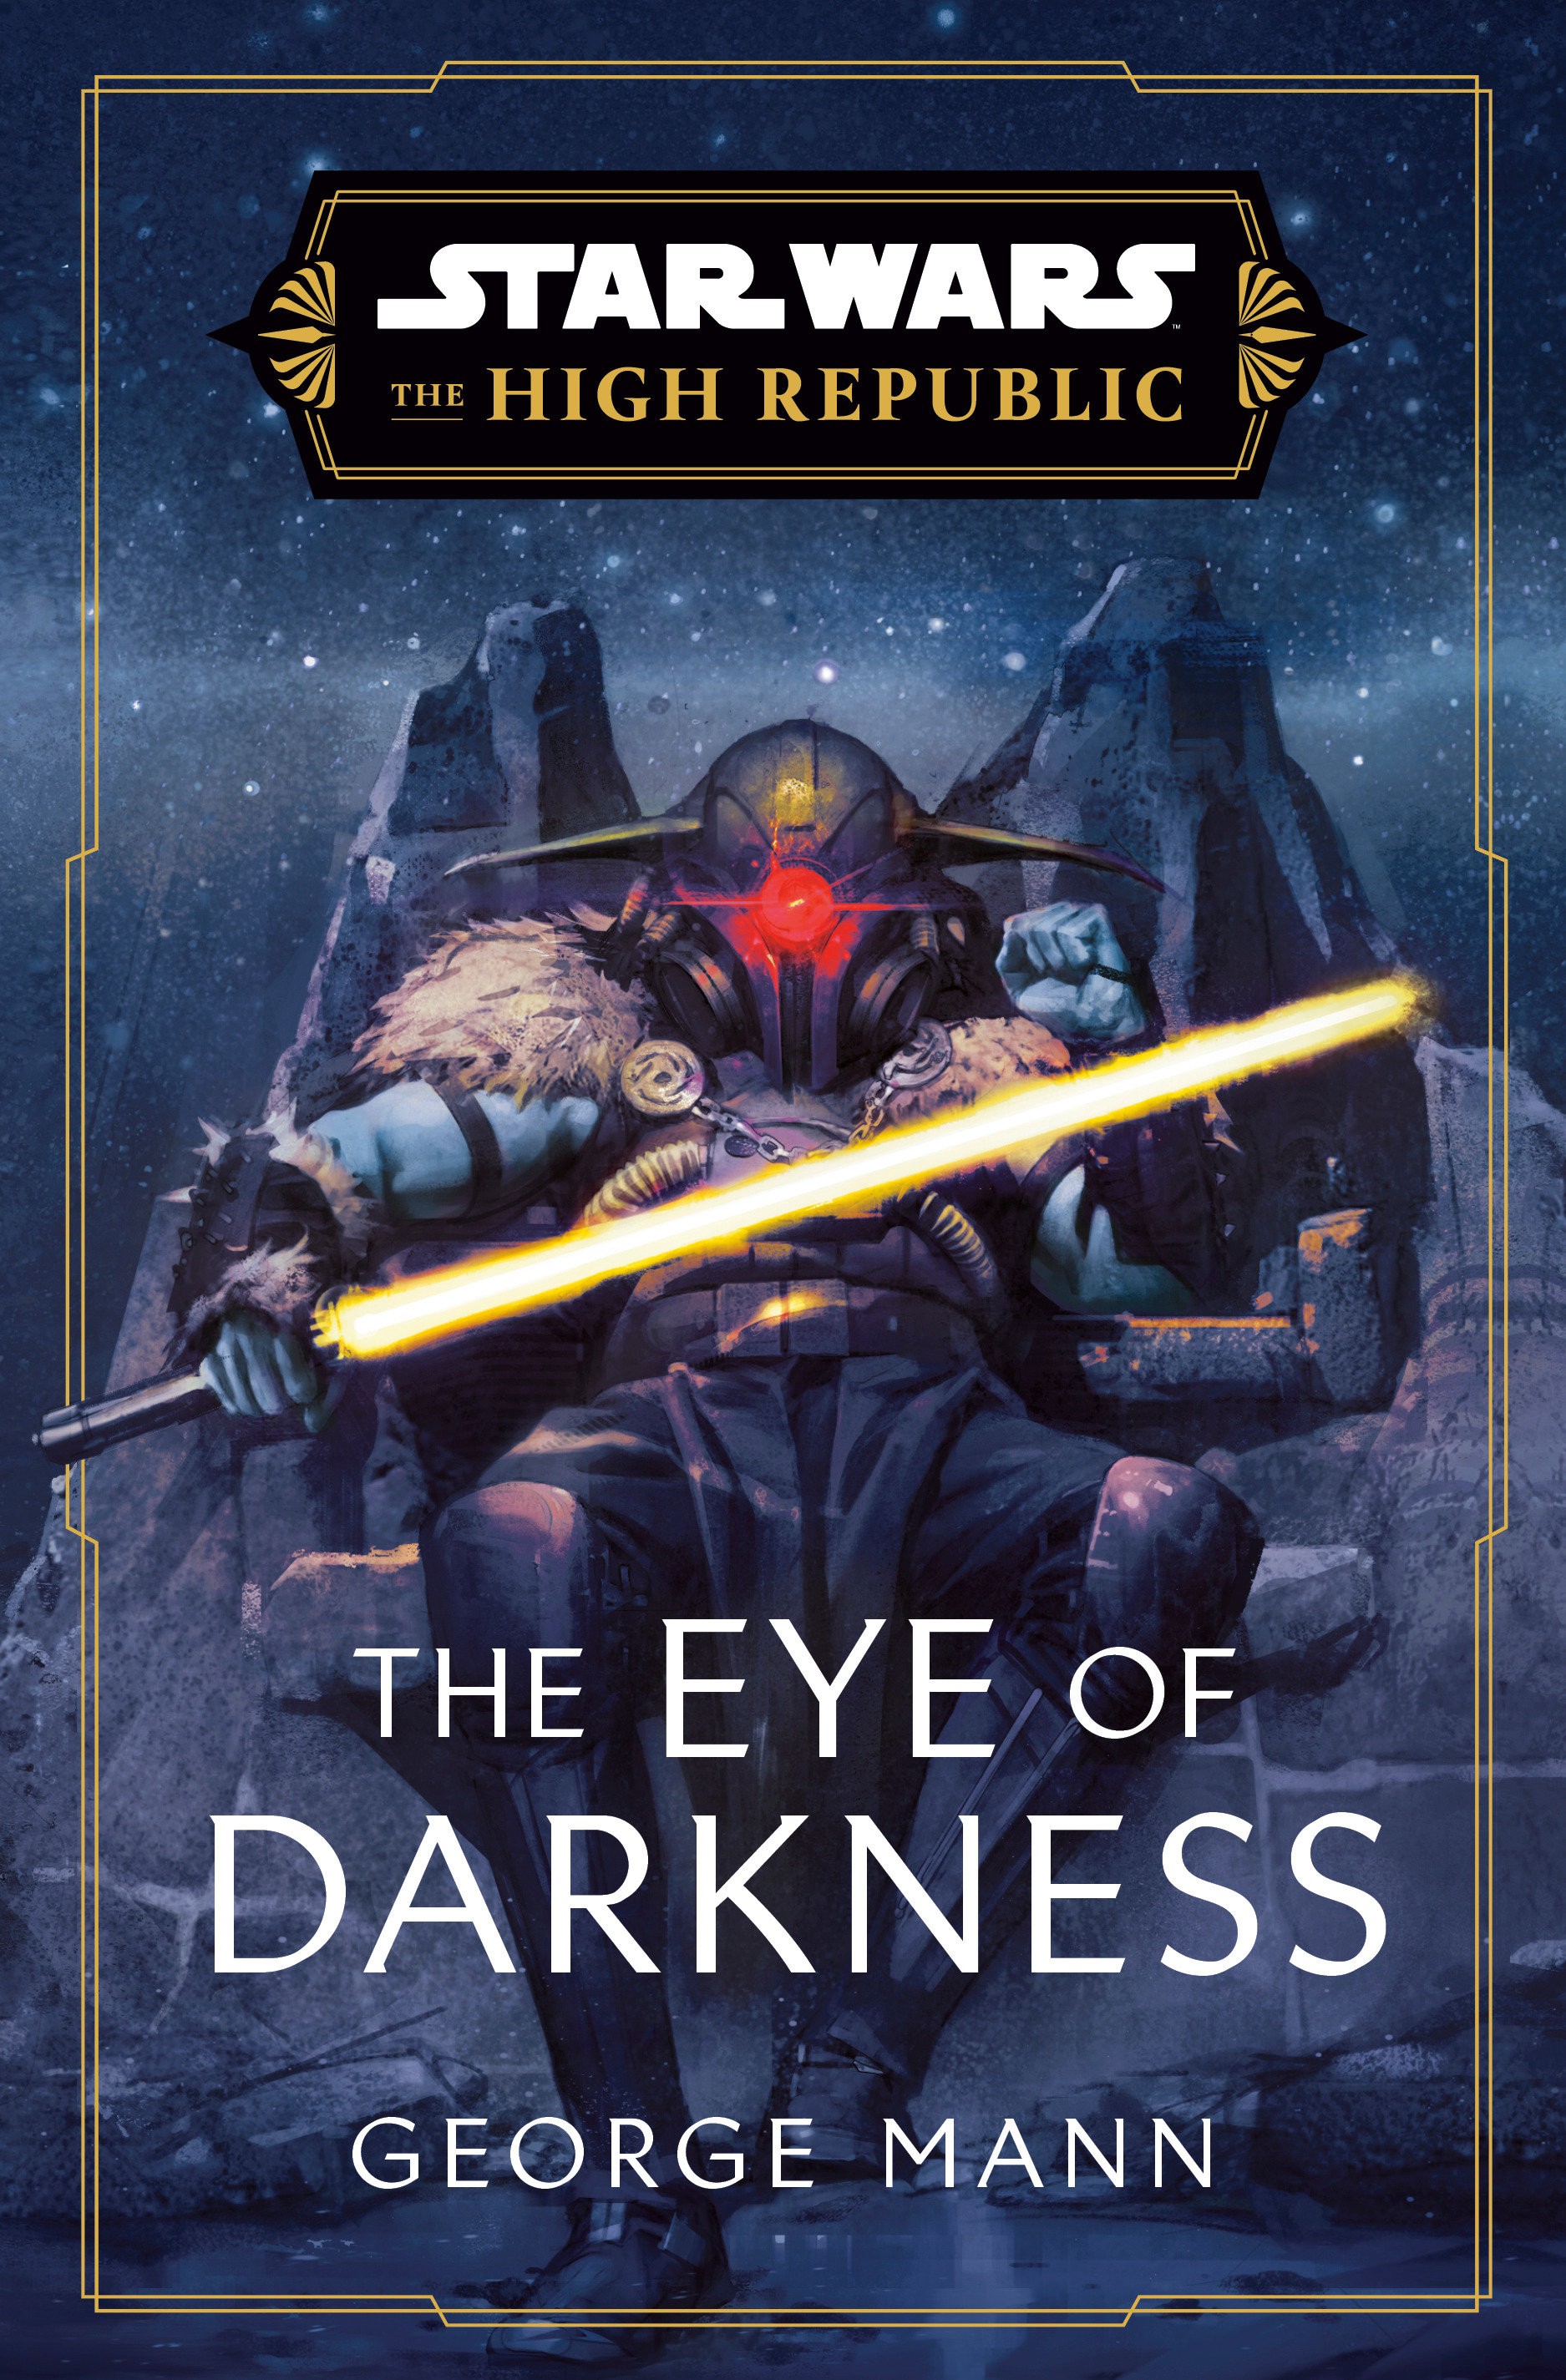 Star Wars: The High Republic Hardcover Novel Volume 4 The Eye of Darkness